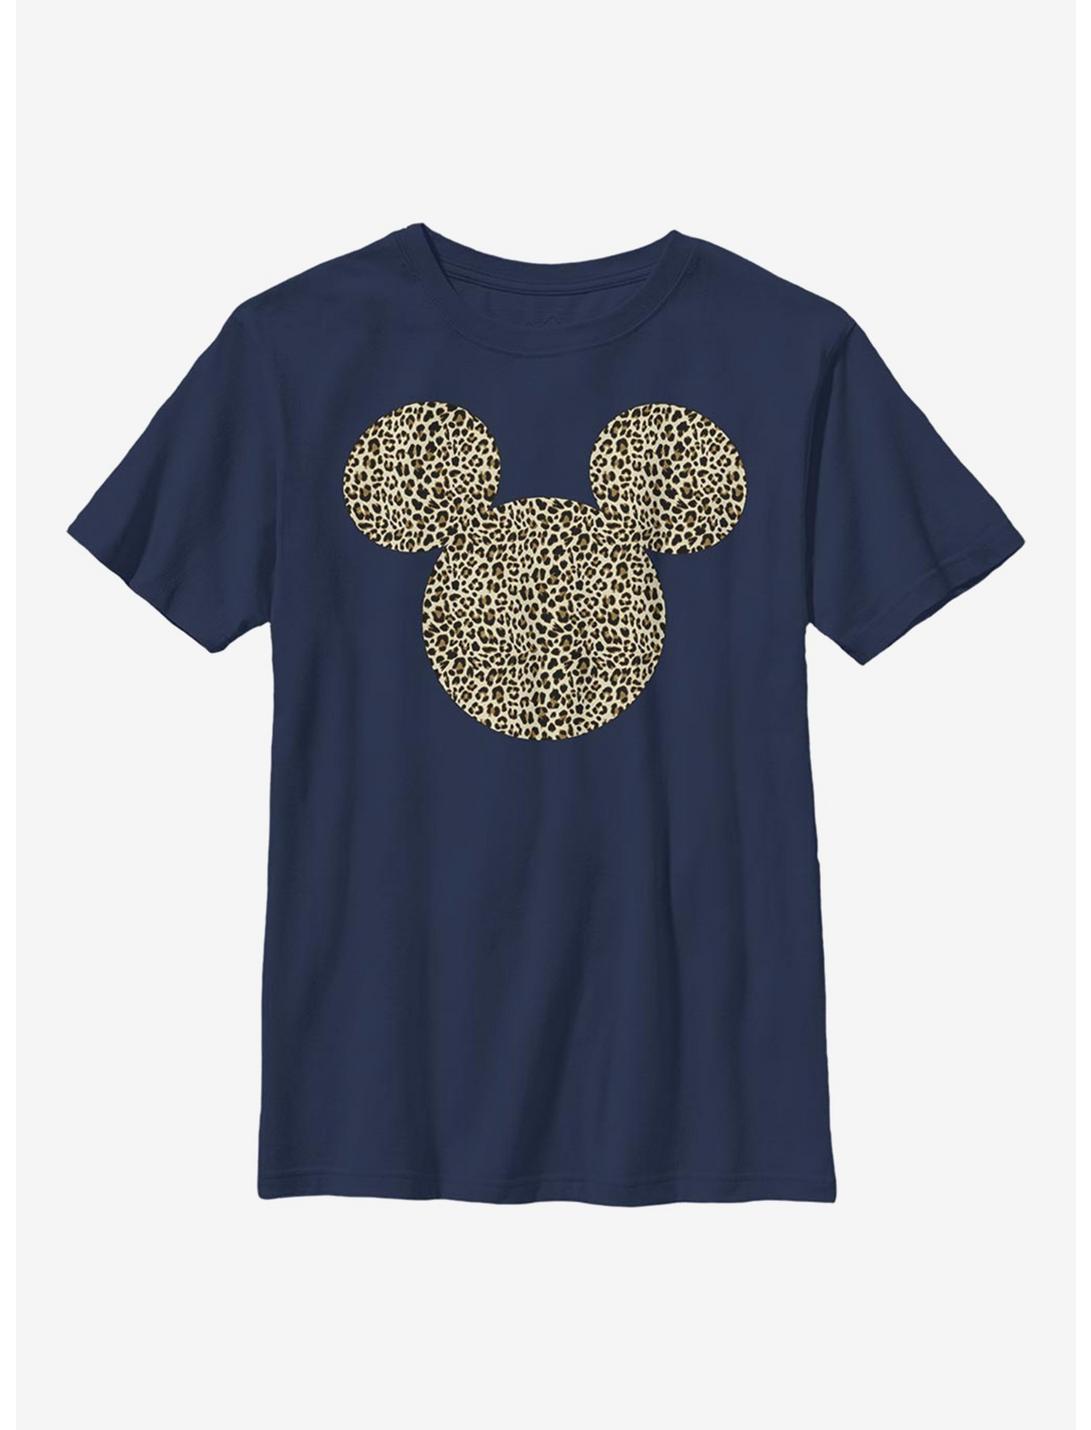 Plus Size Disney Mickey Mouse Animal Ears Youth T-Shirt, NAVY, hi-res